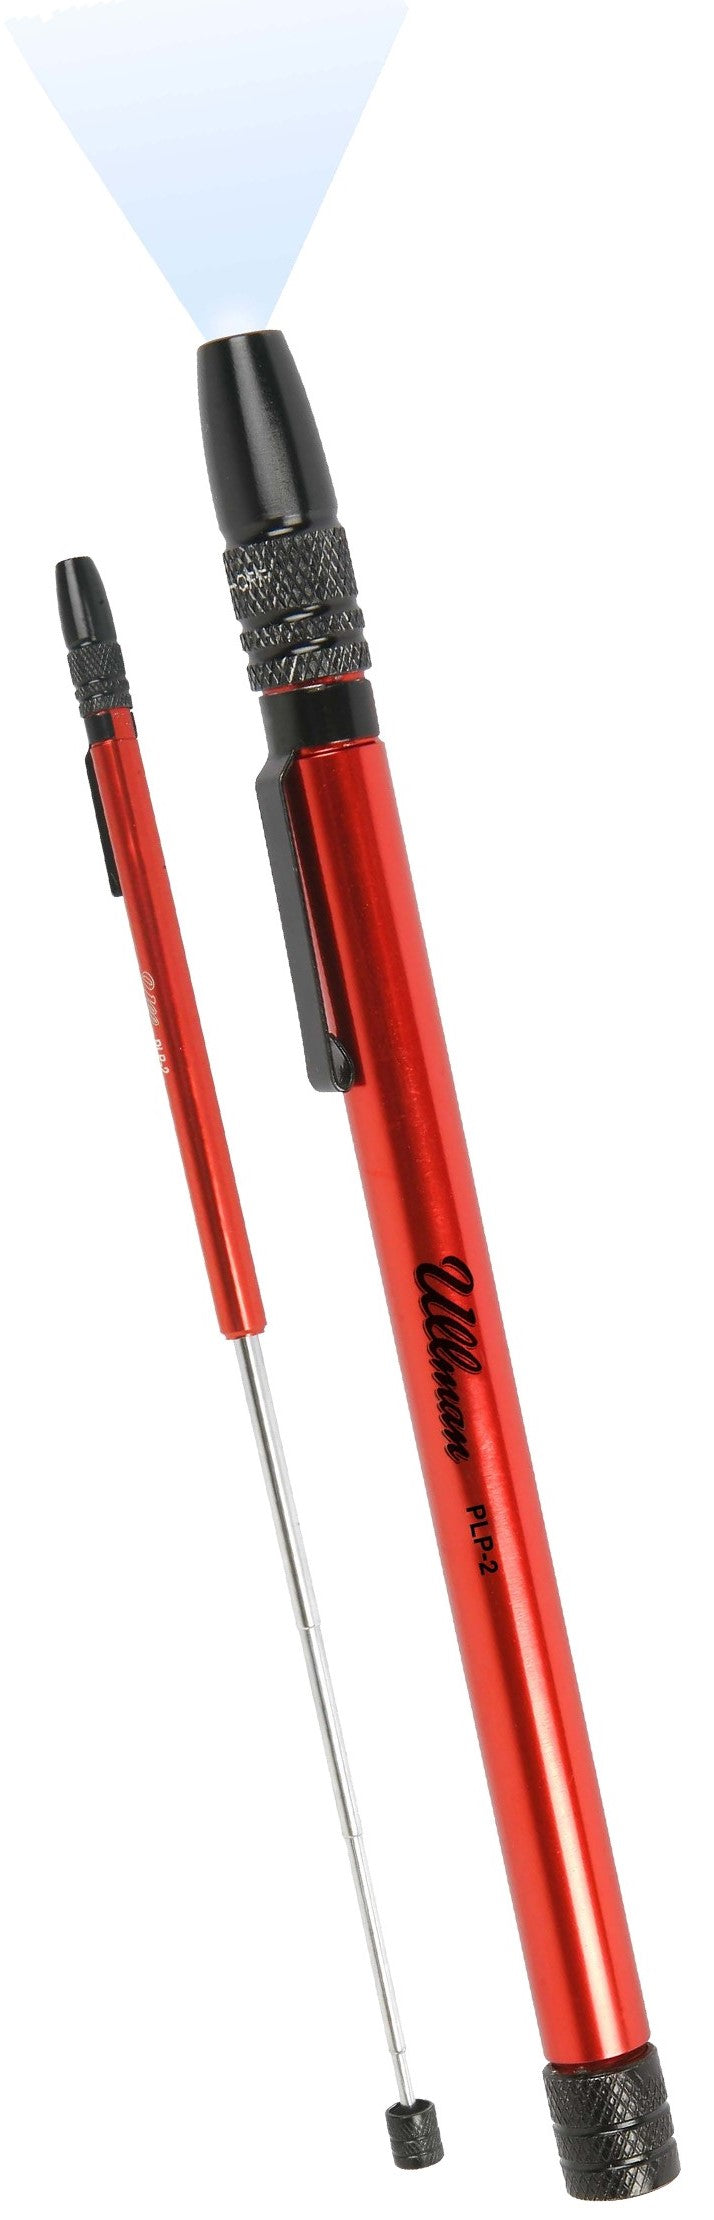 ULLMAN PLP-2 Telescopic Magnetic Pick-Up Tool with LED Light, PLP2